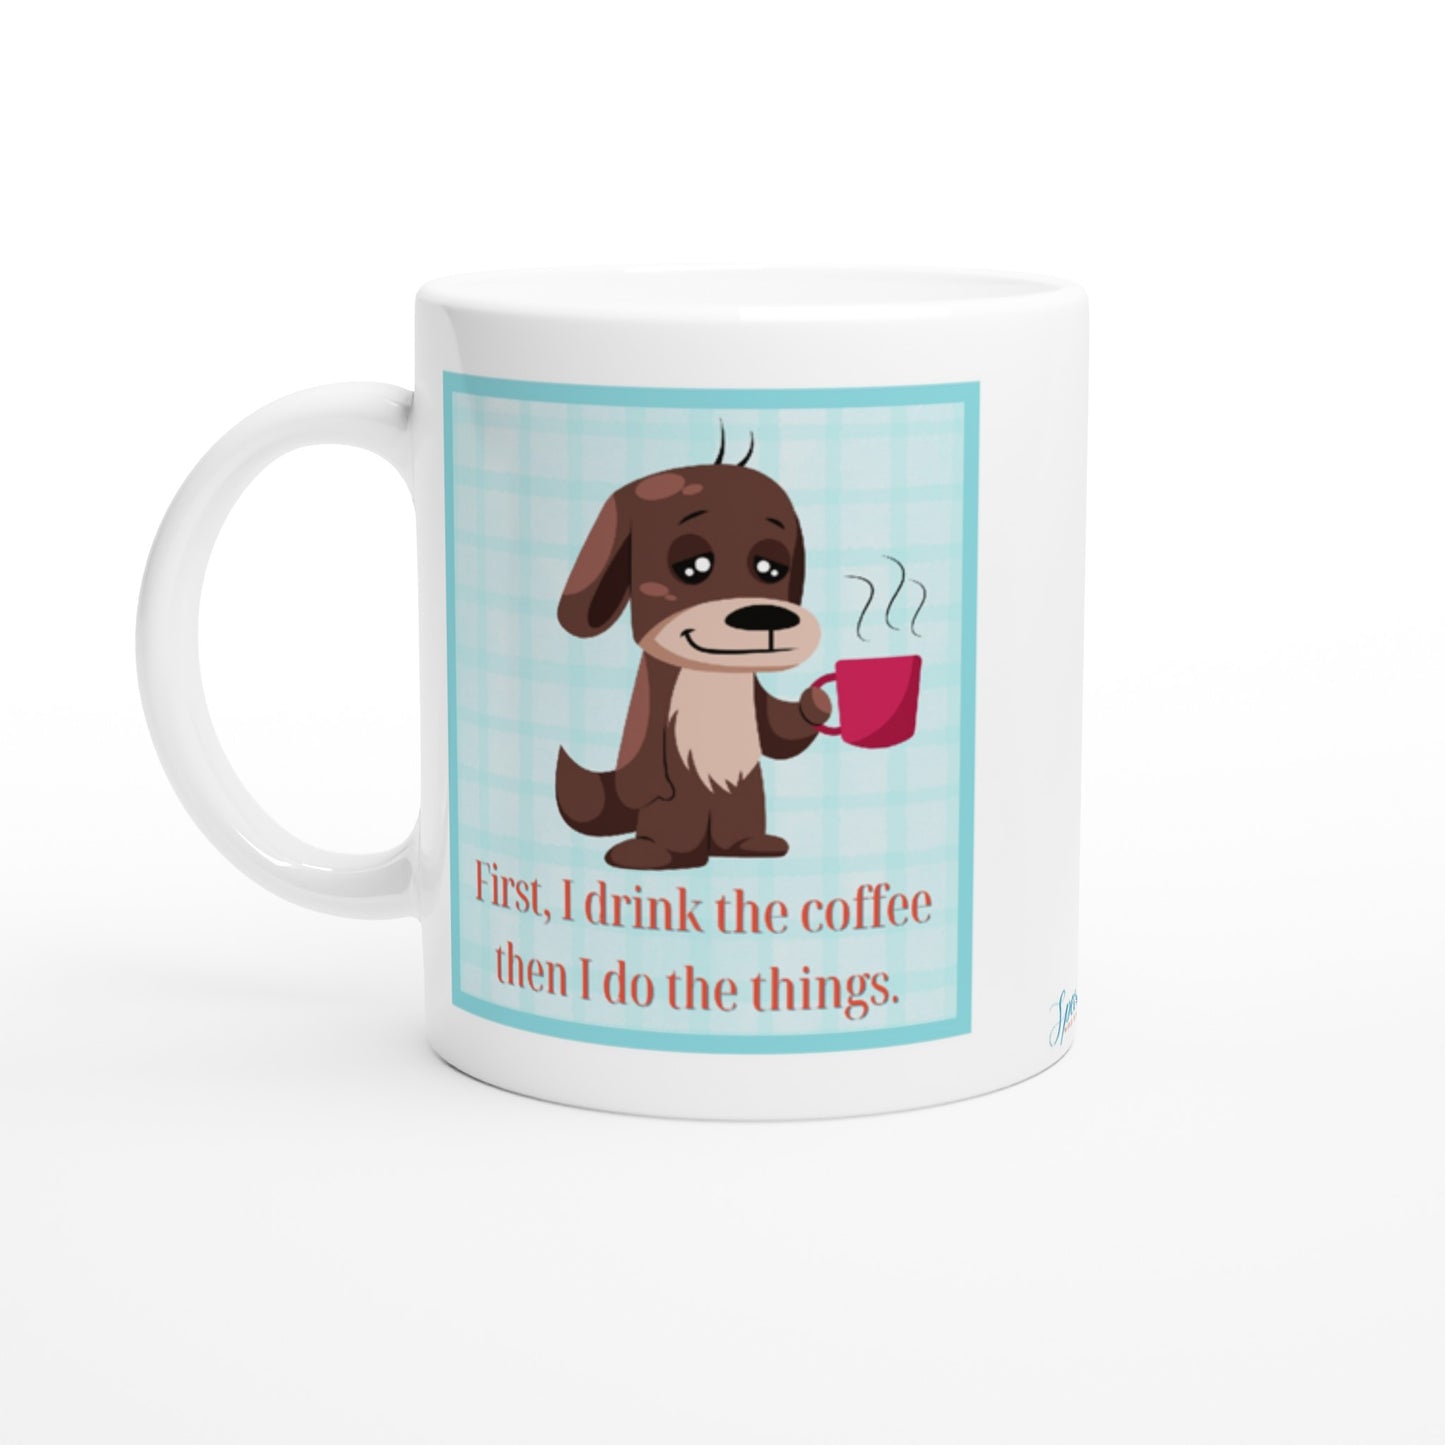 First I drink the coffee then I do the things - 11 oz. Mug